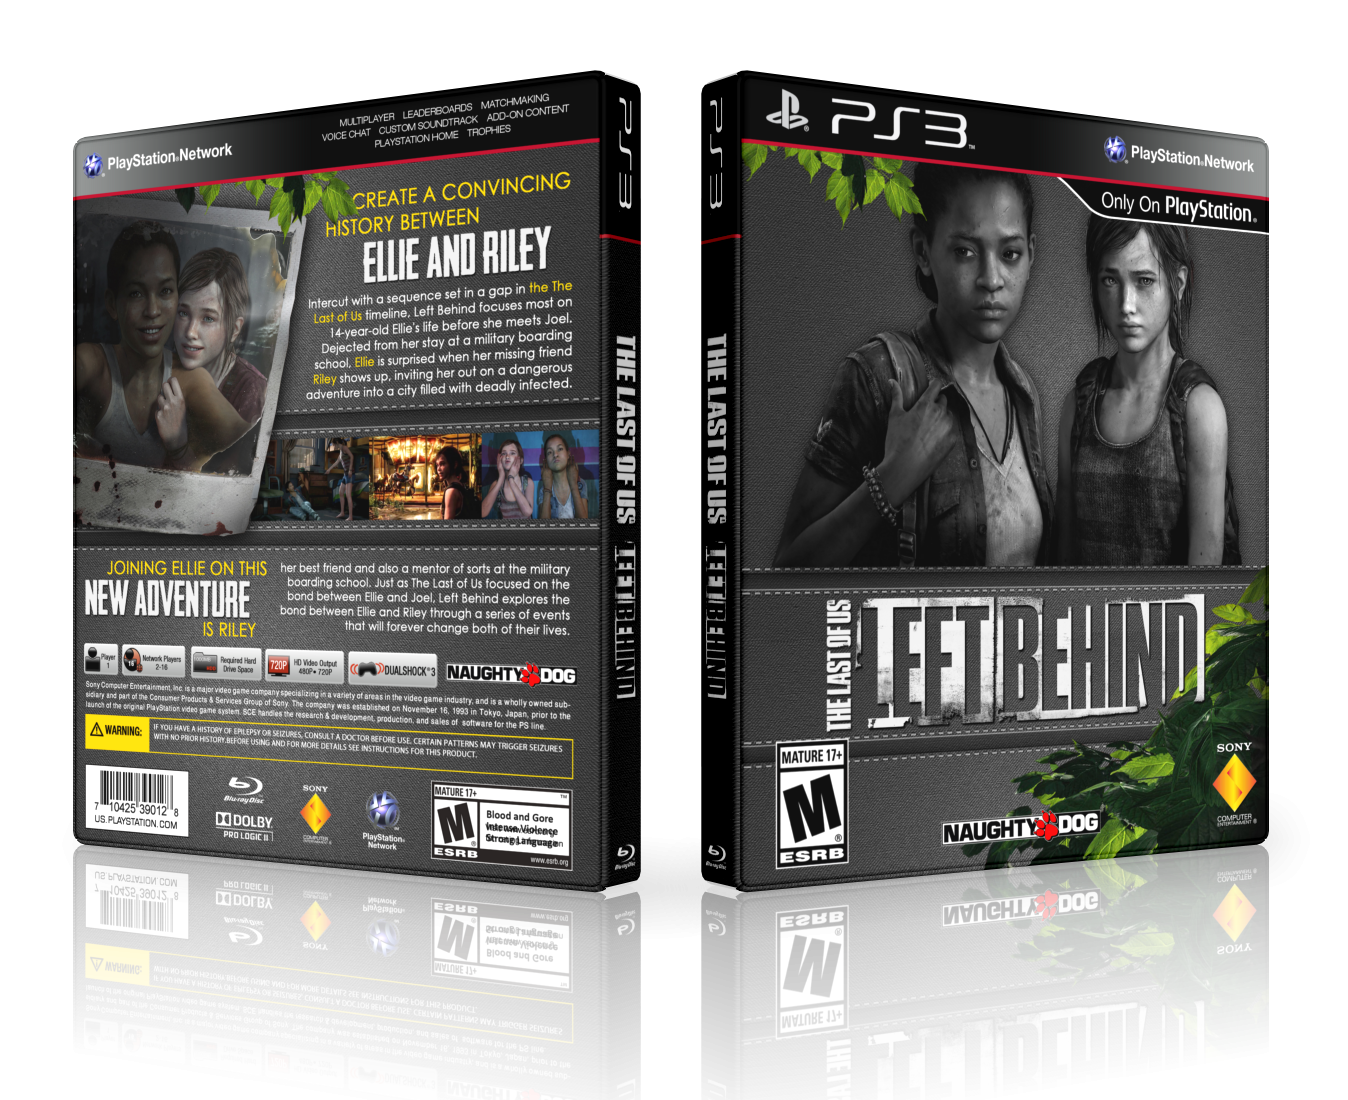 The Last of Us: Left Behind box cover